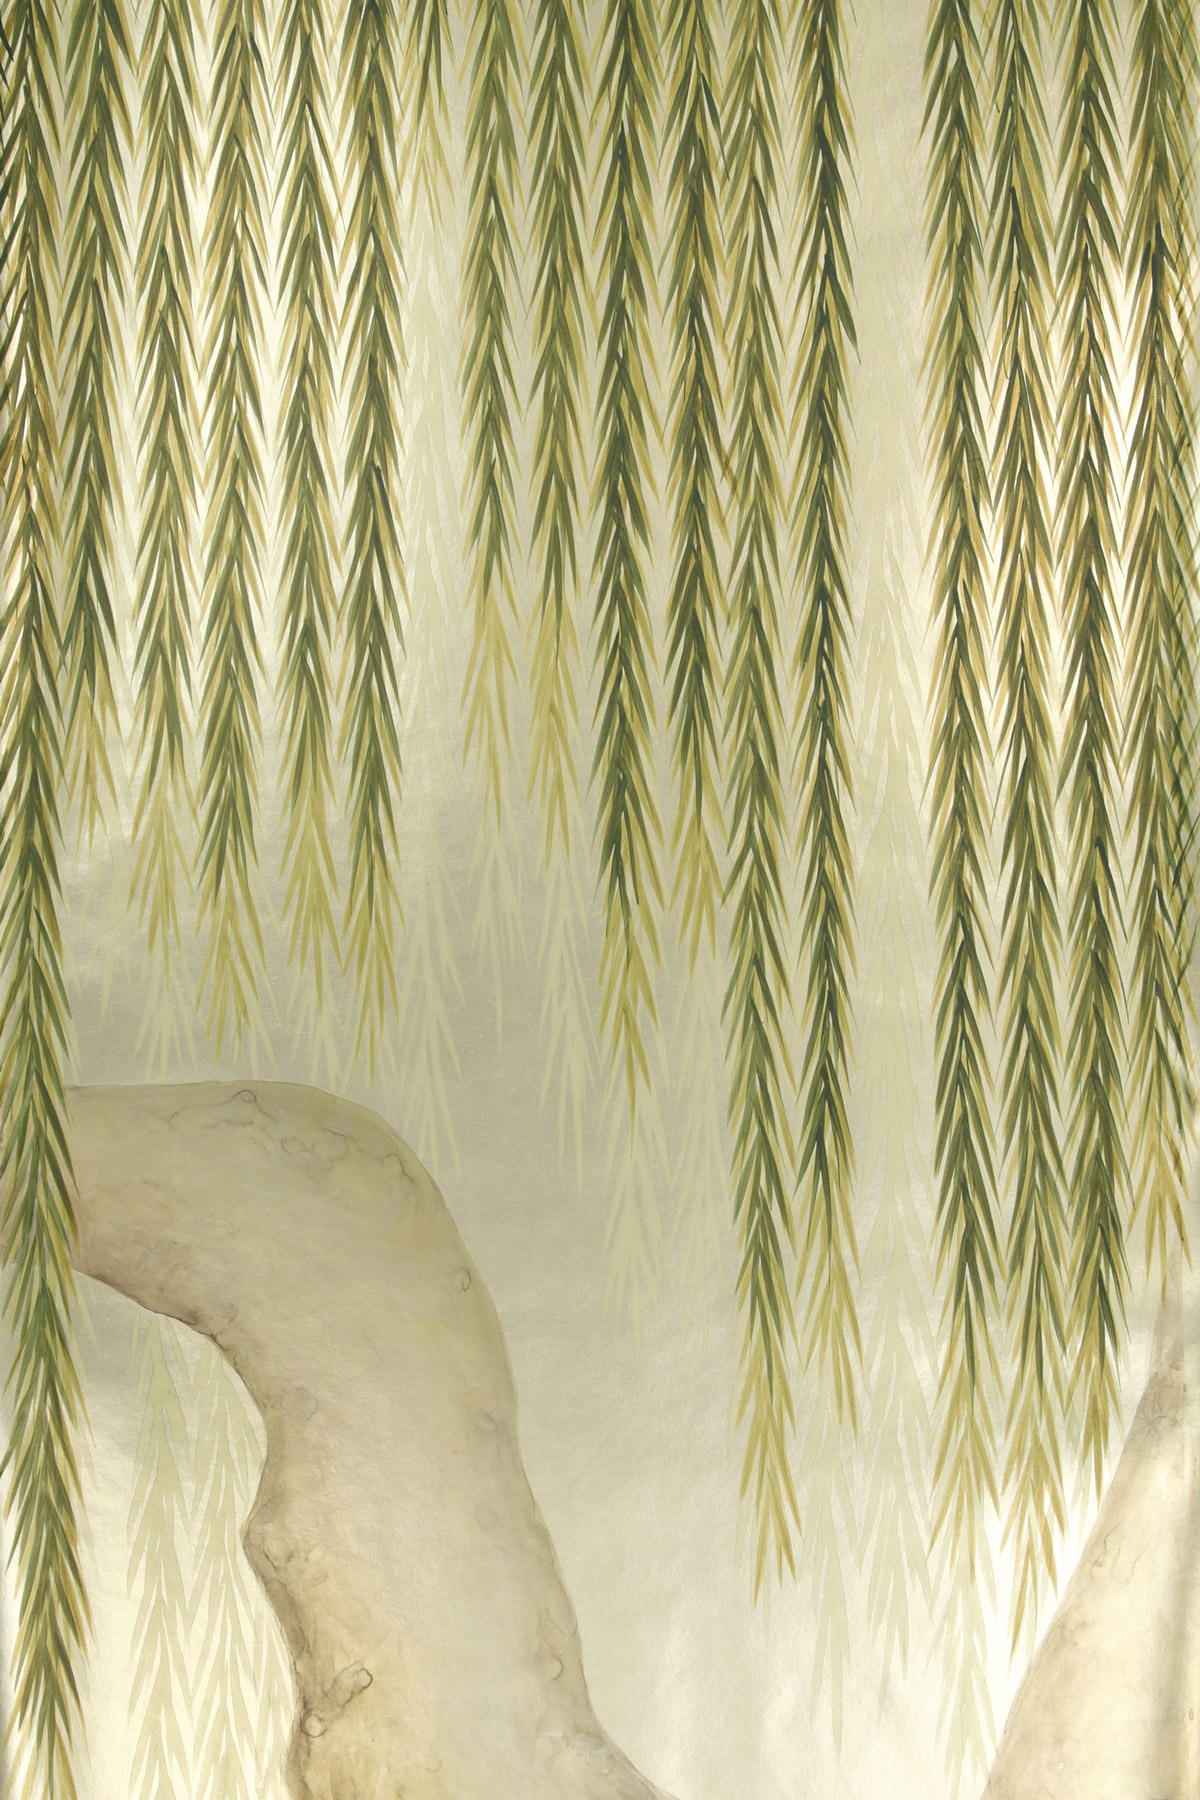 'Willow' in Original design colours on Champagne Gold gilded paper